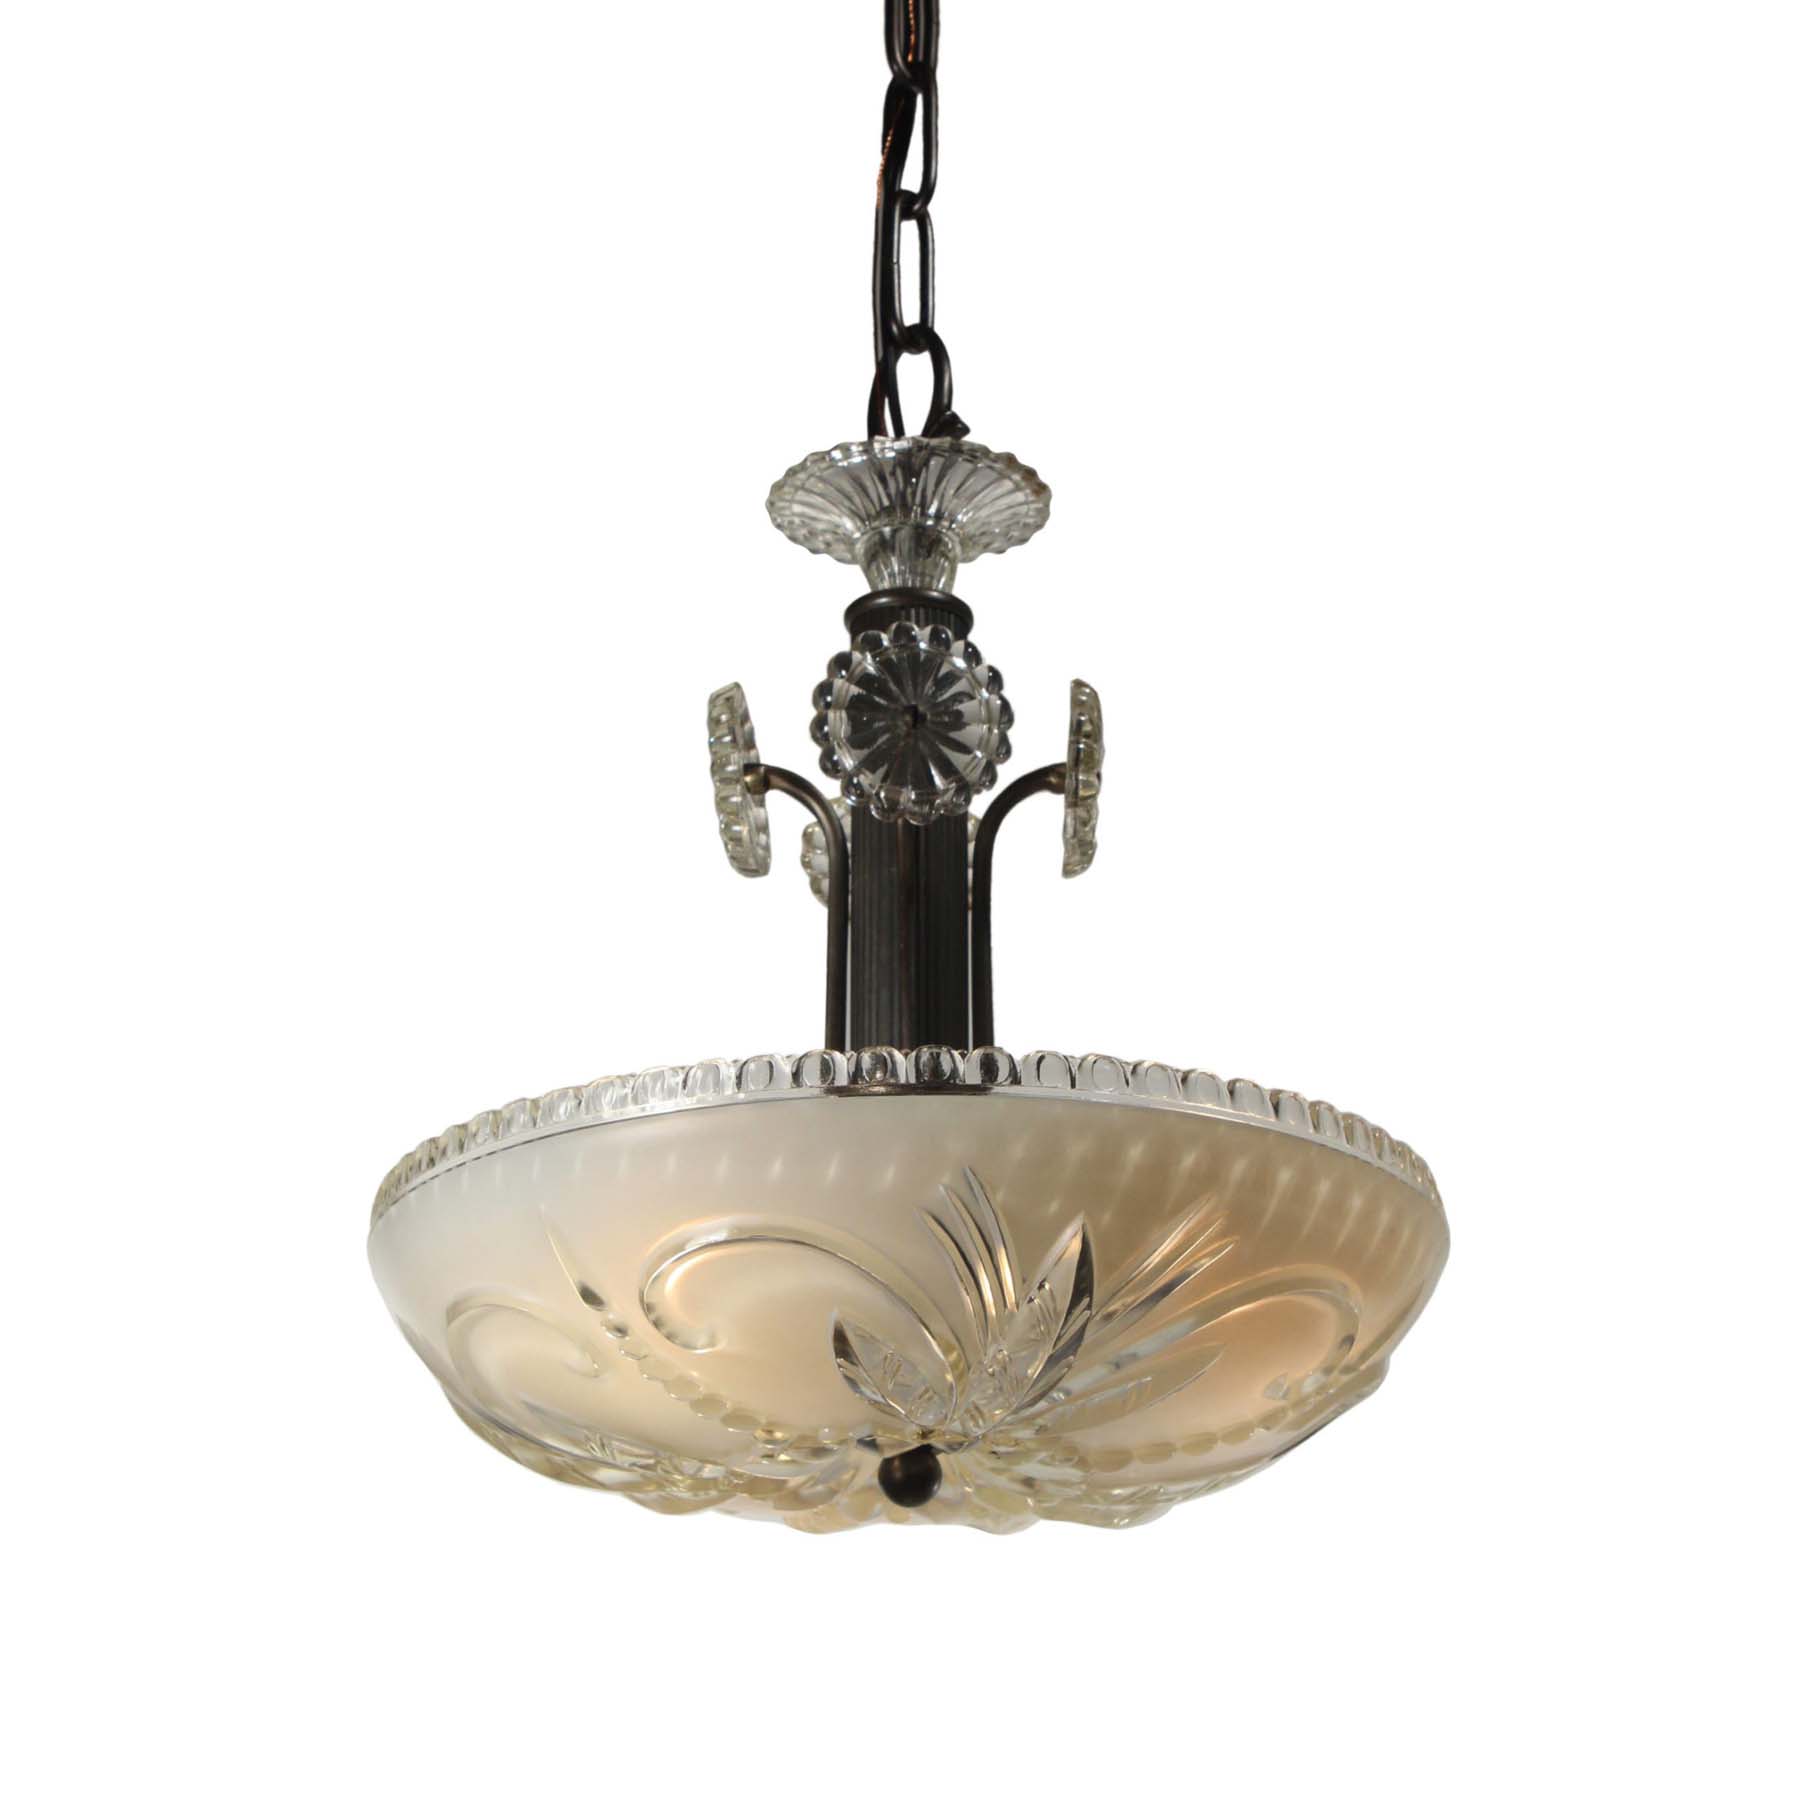 SOLD Vintage Pendant Light with Glass Shade, c. 1940’s-0